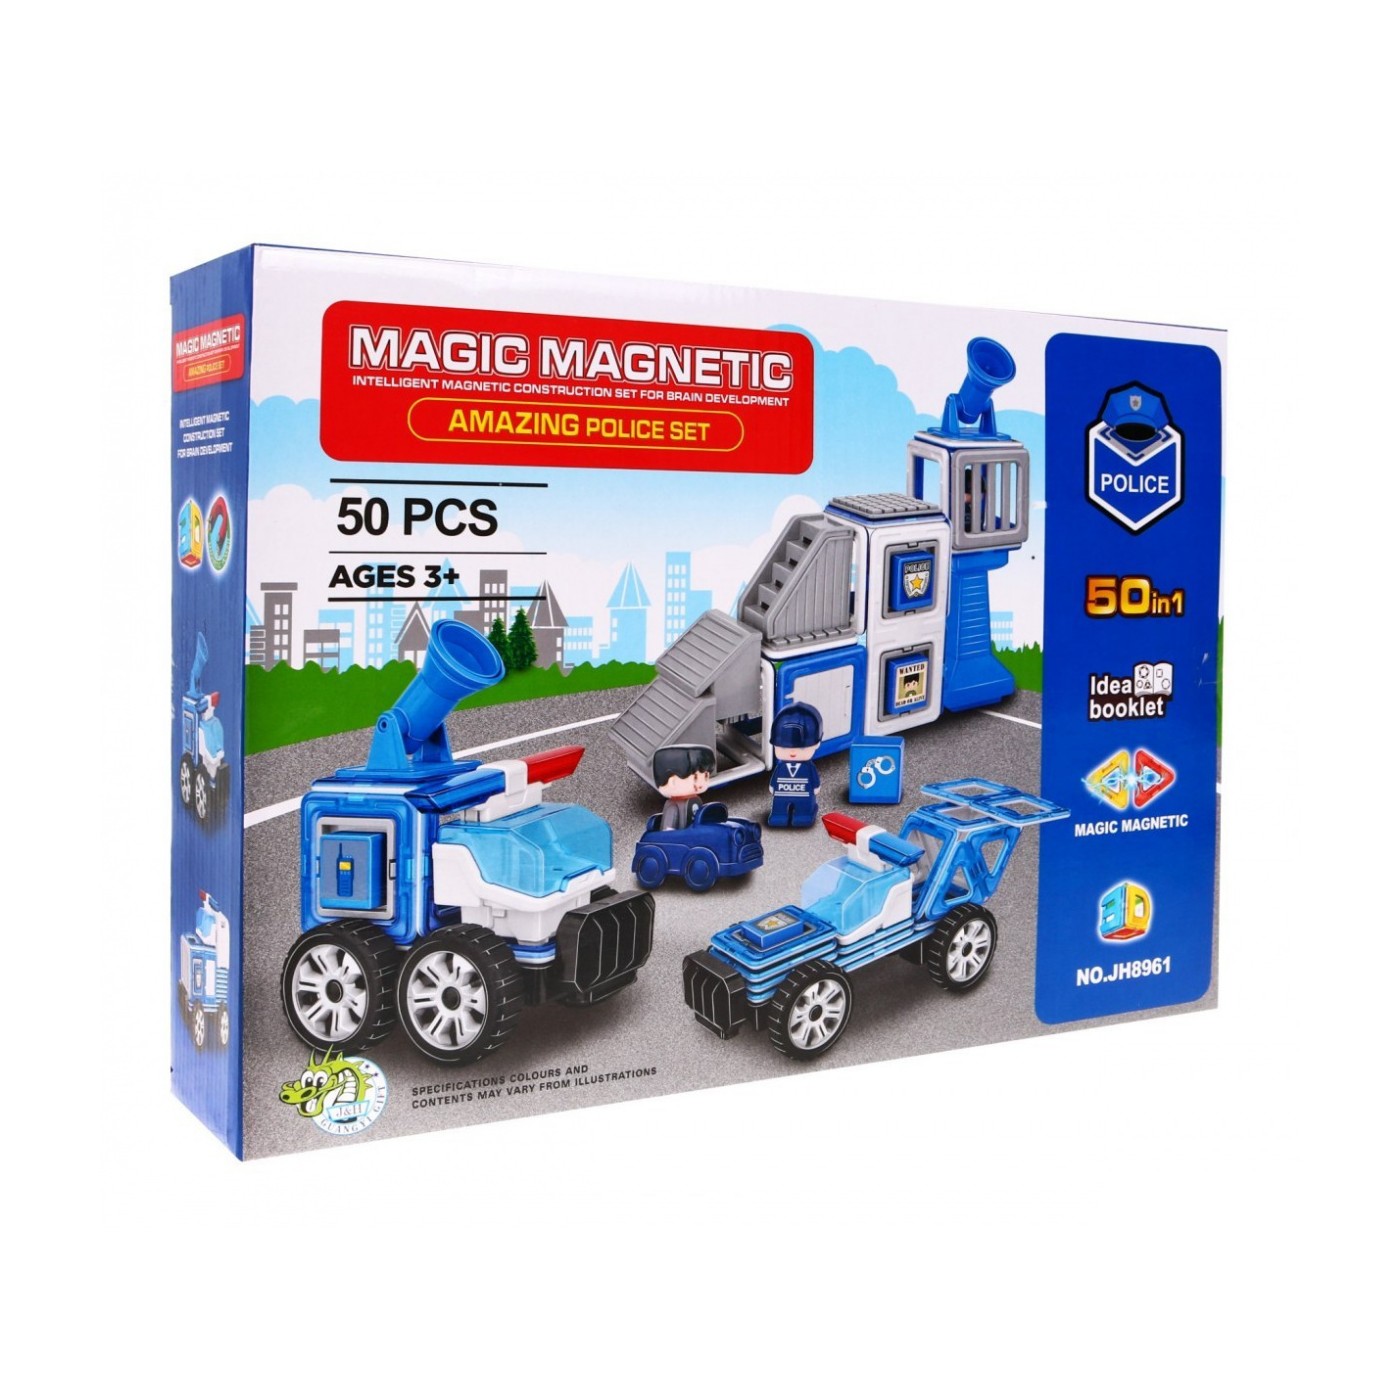 Magical Magnetic Bricks Police stations